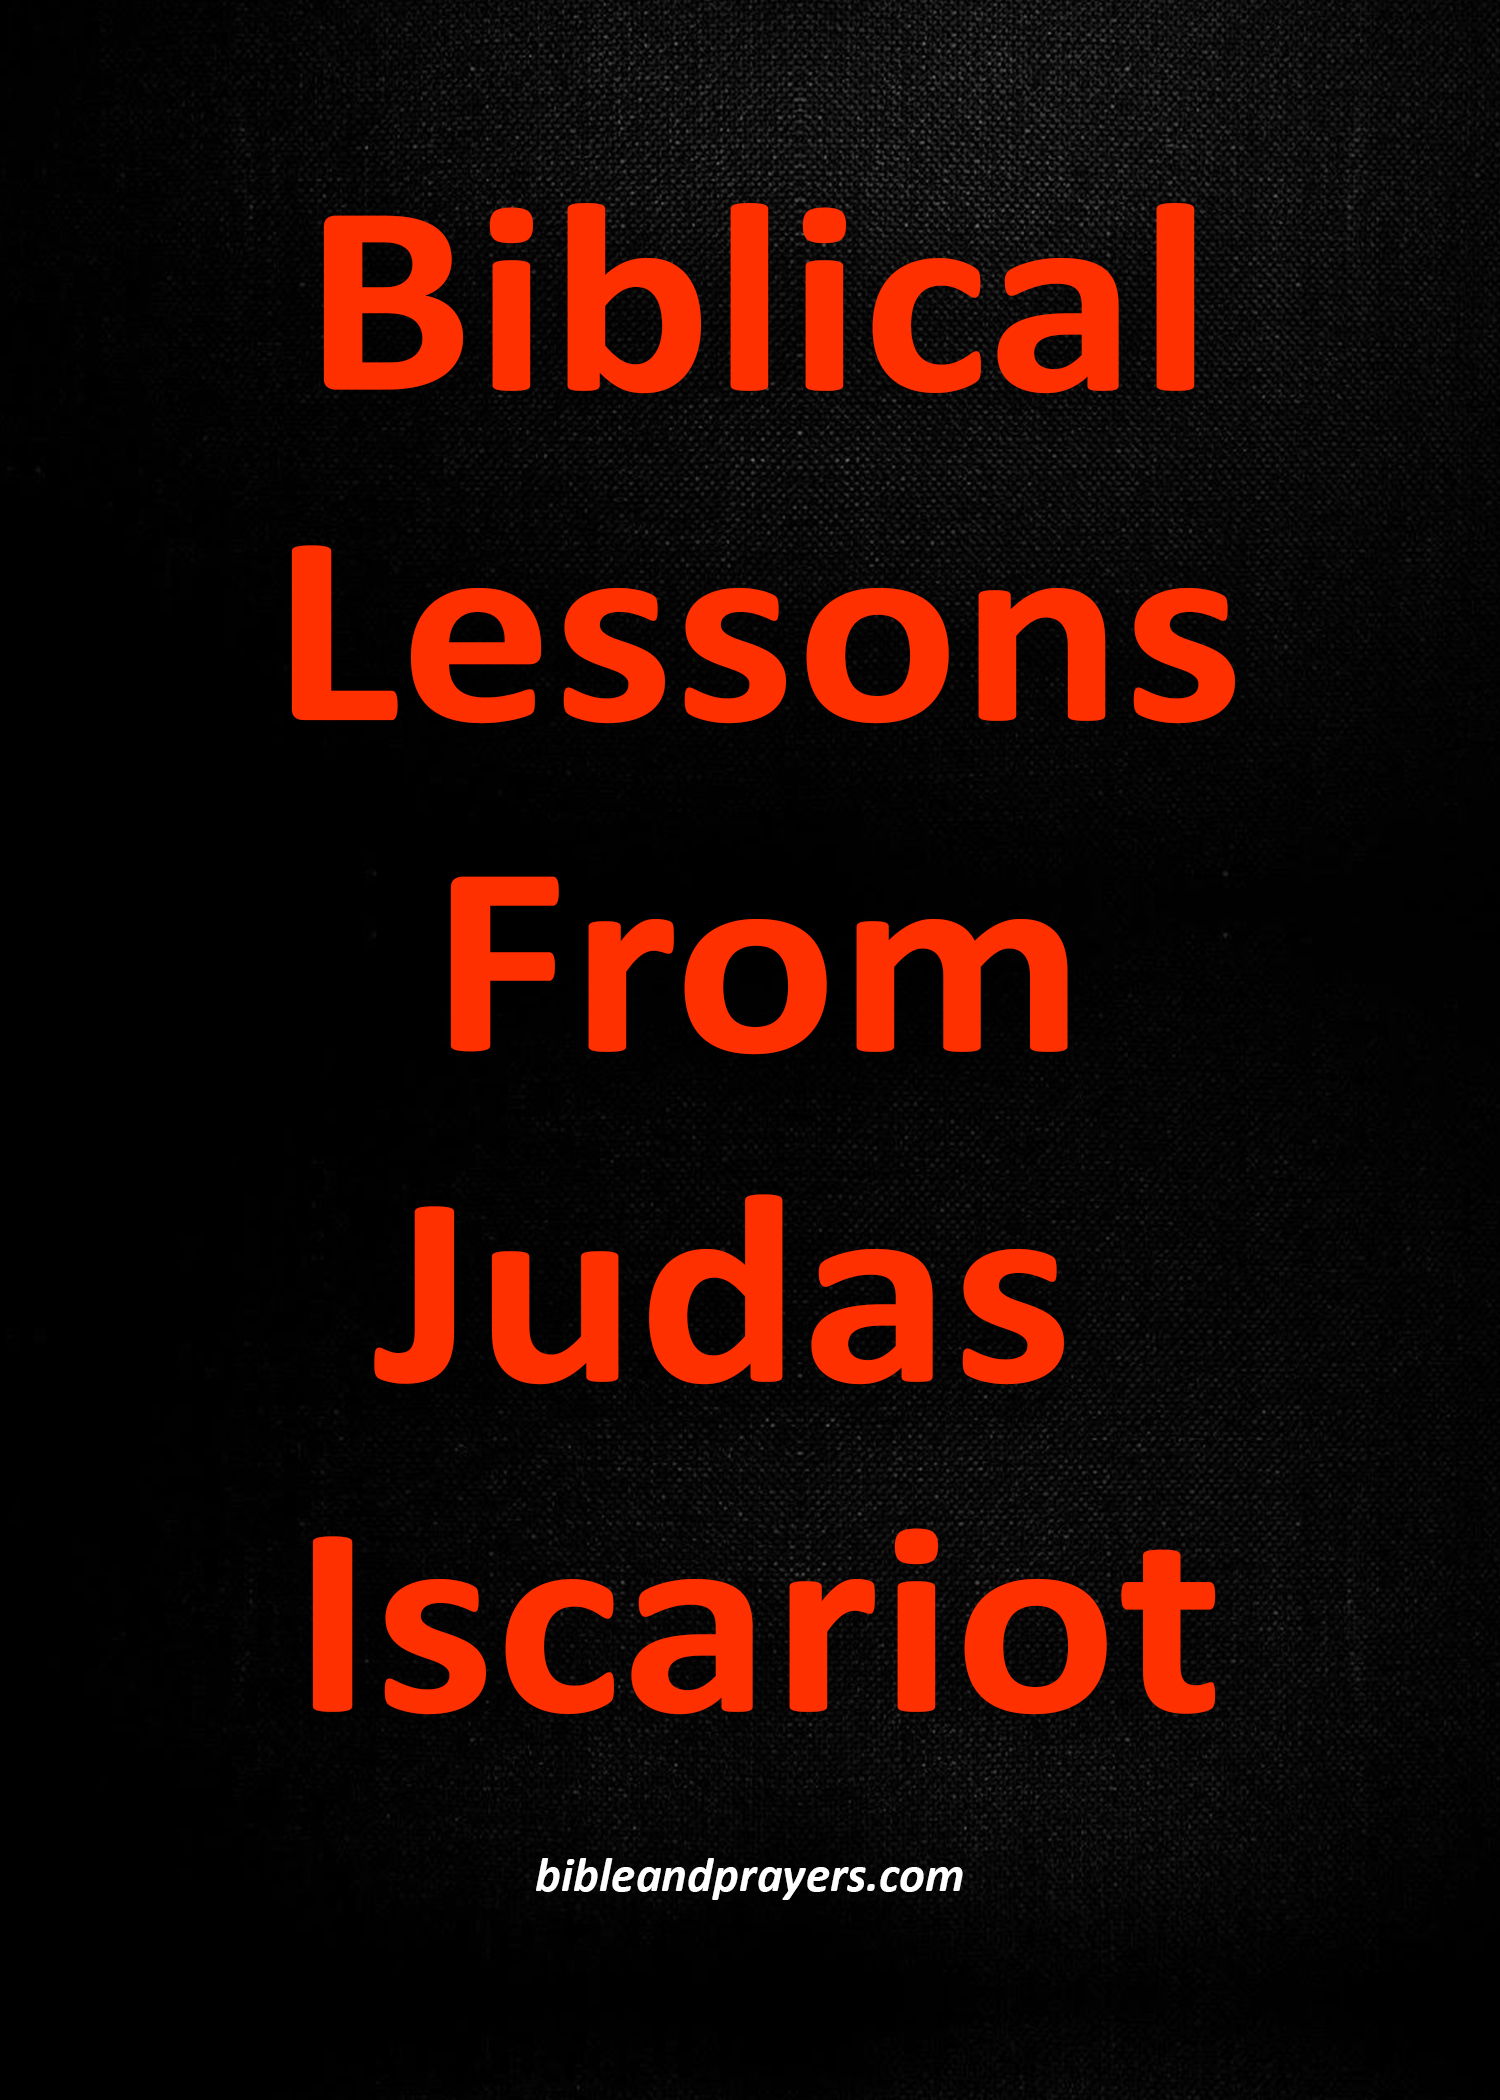 Biblical Lessons From Judas Iscariot